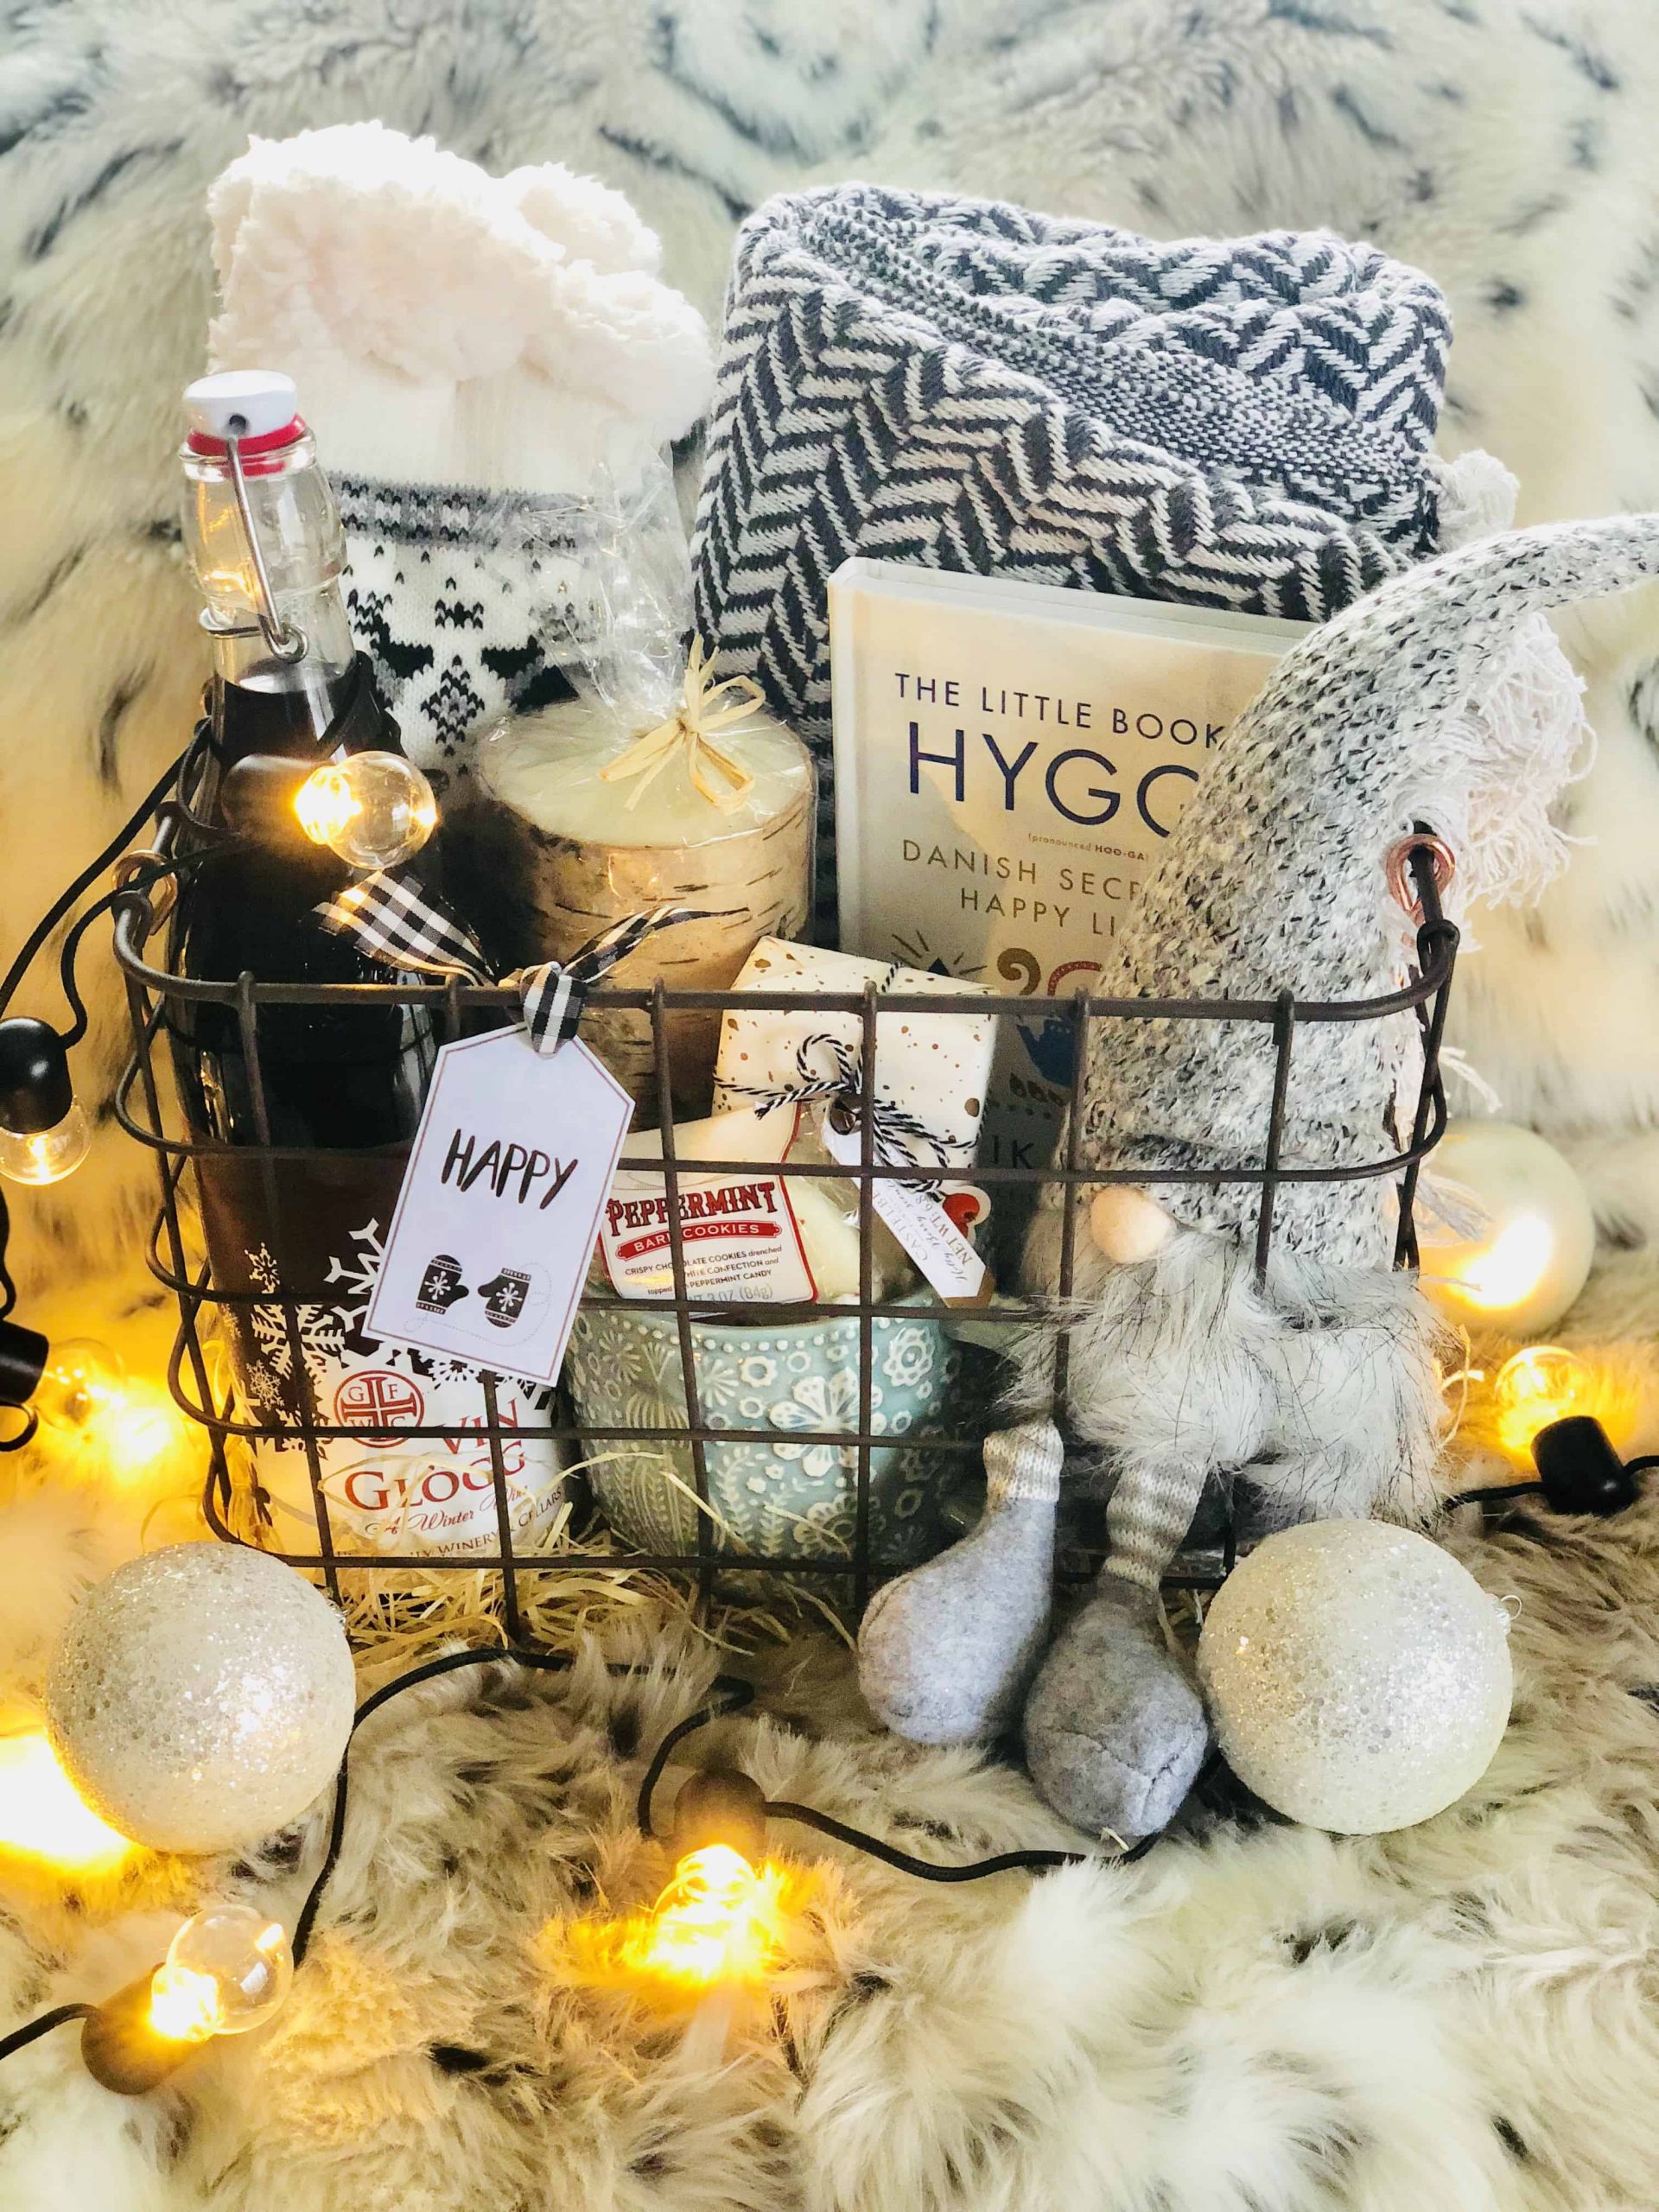 Warm And Cozy Gift Basket Ideas
 A Hygge Gift Basket That ll Make Someone Snuggly this